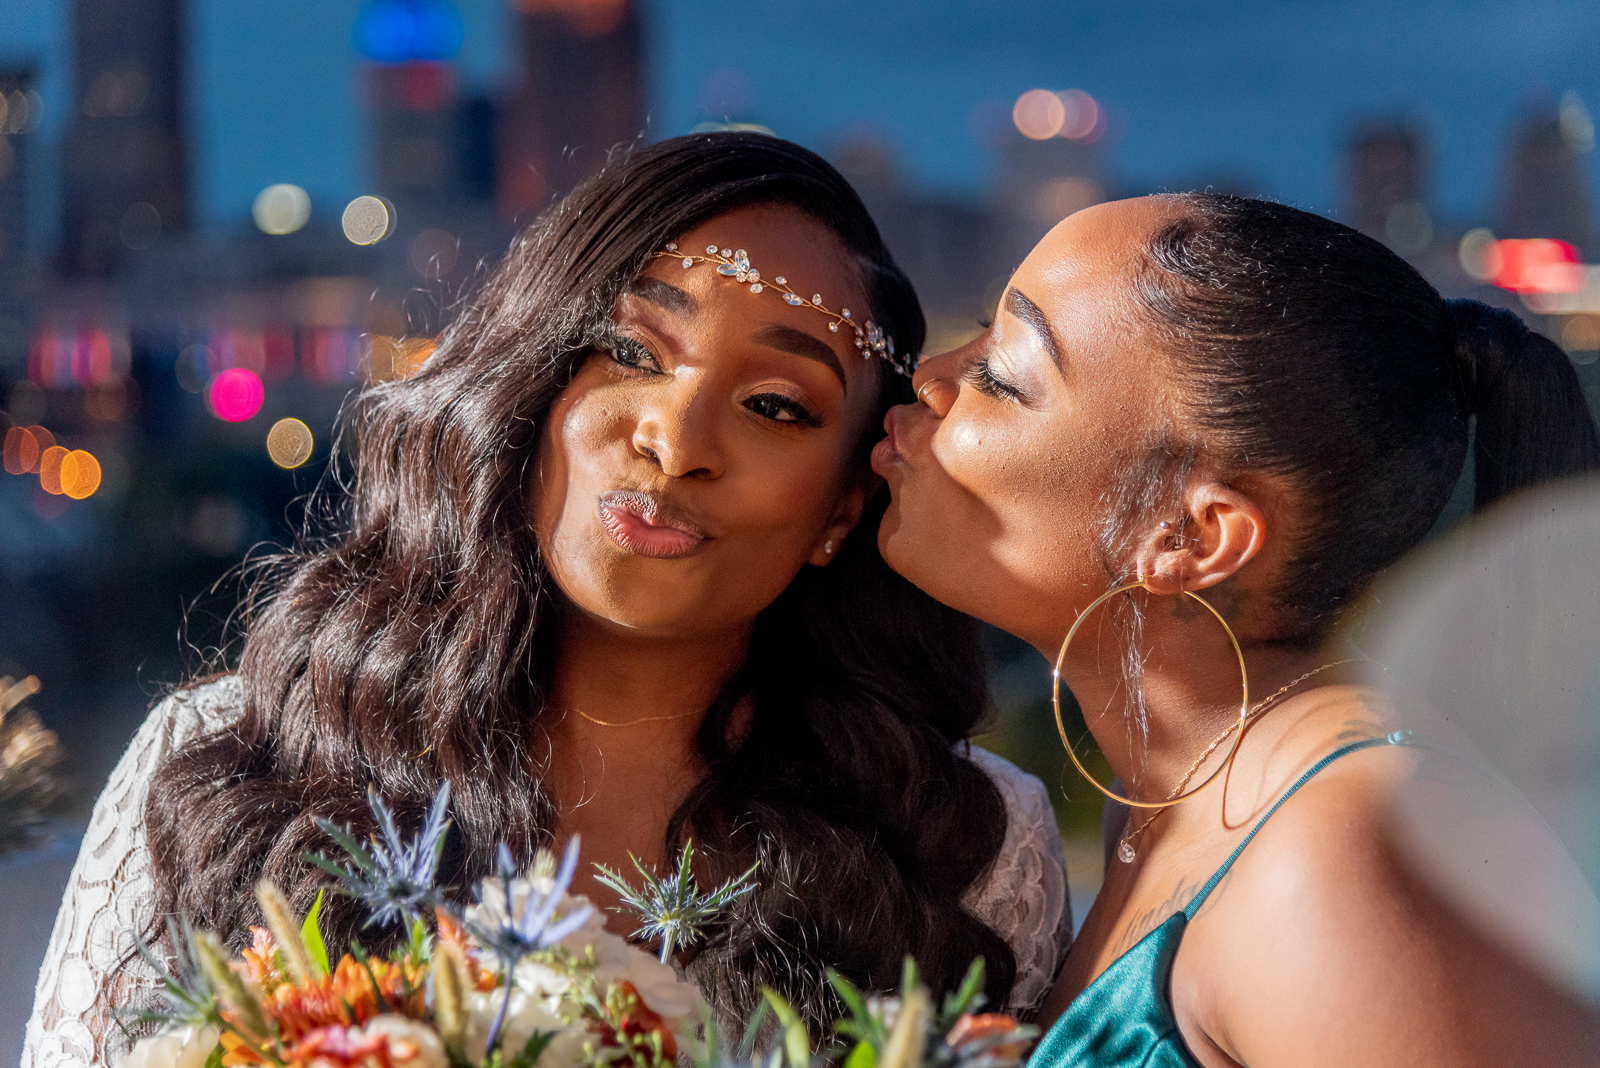 Bride with bridesmaid, bridal party portrait, kiss, sweet, candid, African American bride, African American wedding, night photography, night wedding photo, downtown Cleveland skyline, urban wedding ceremony at Penthouse Events, Ohio City, Cleveland Flats